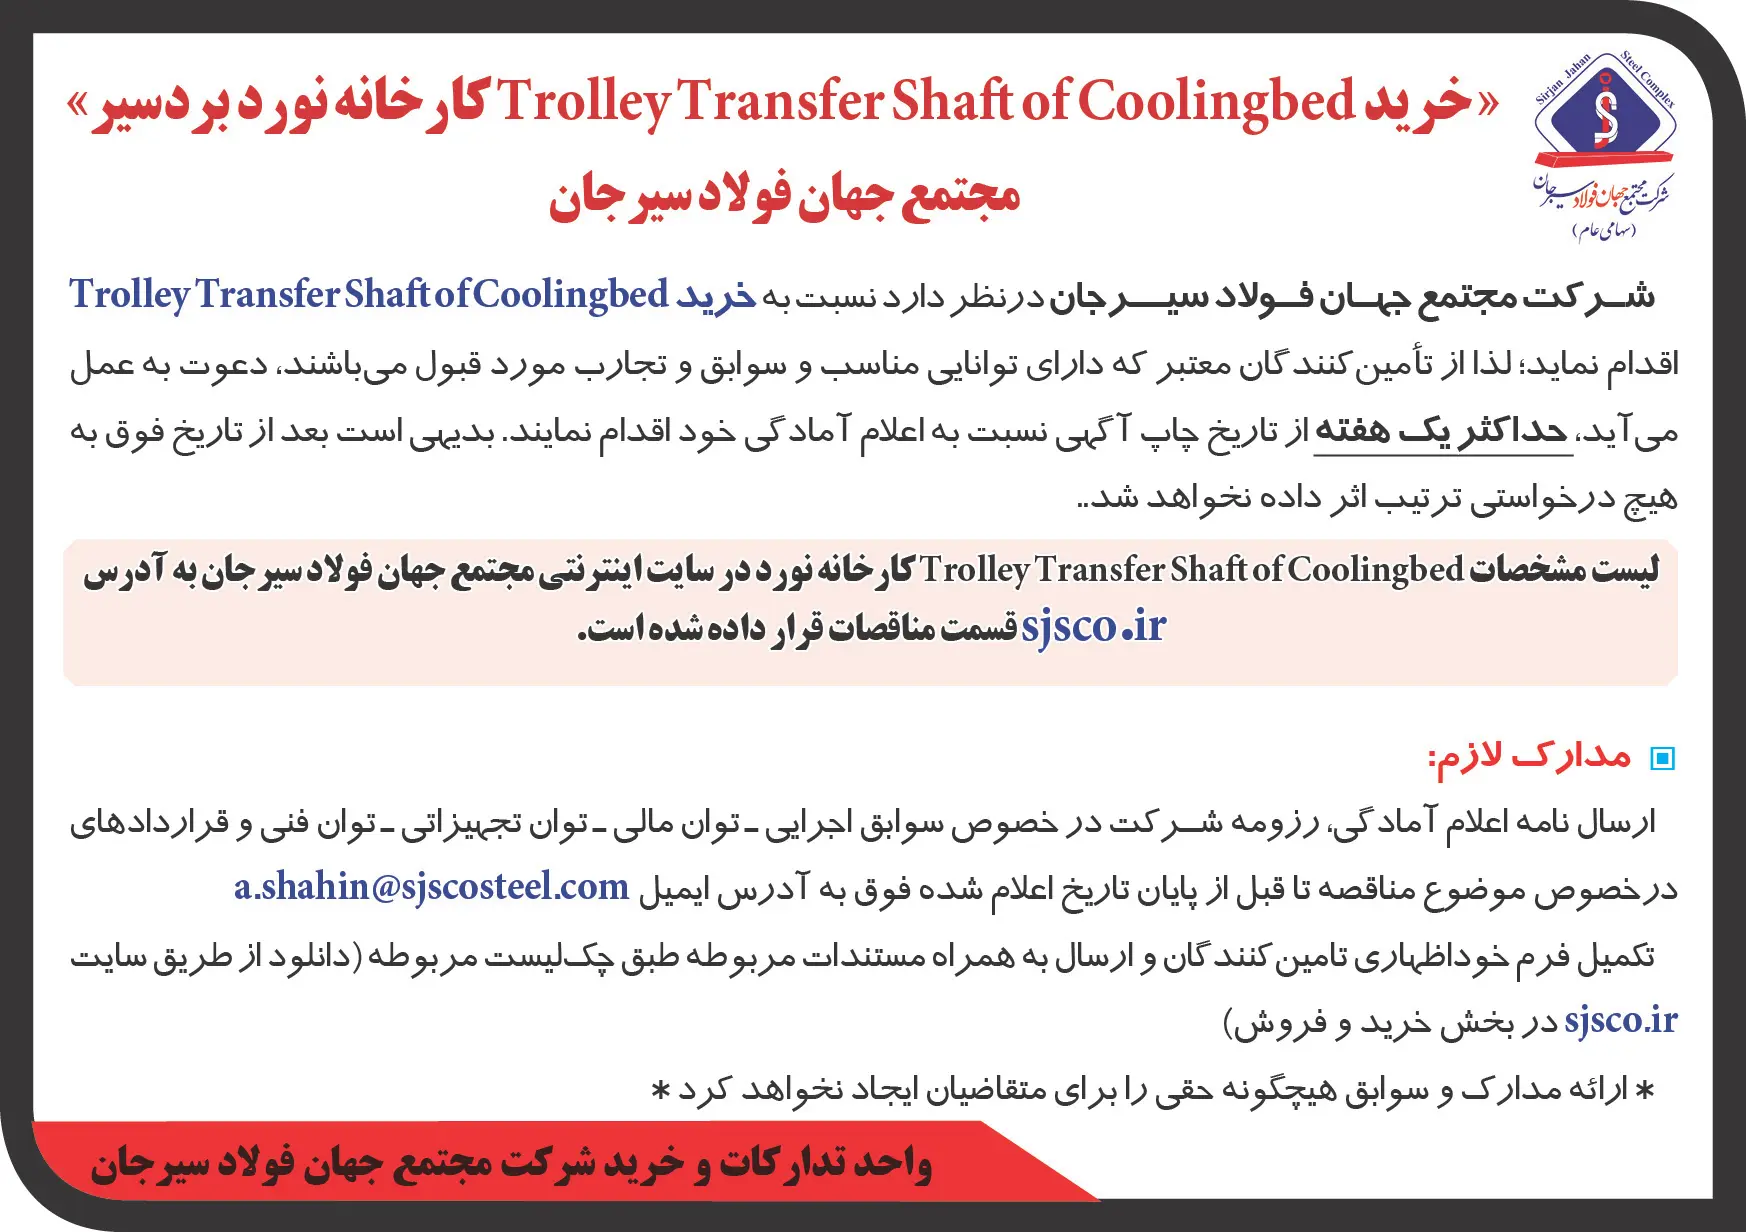 Trolley transtershaft of coolingbed سیرجان خرید